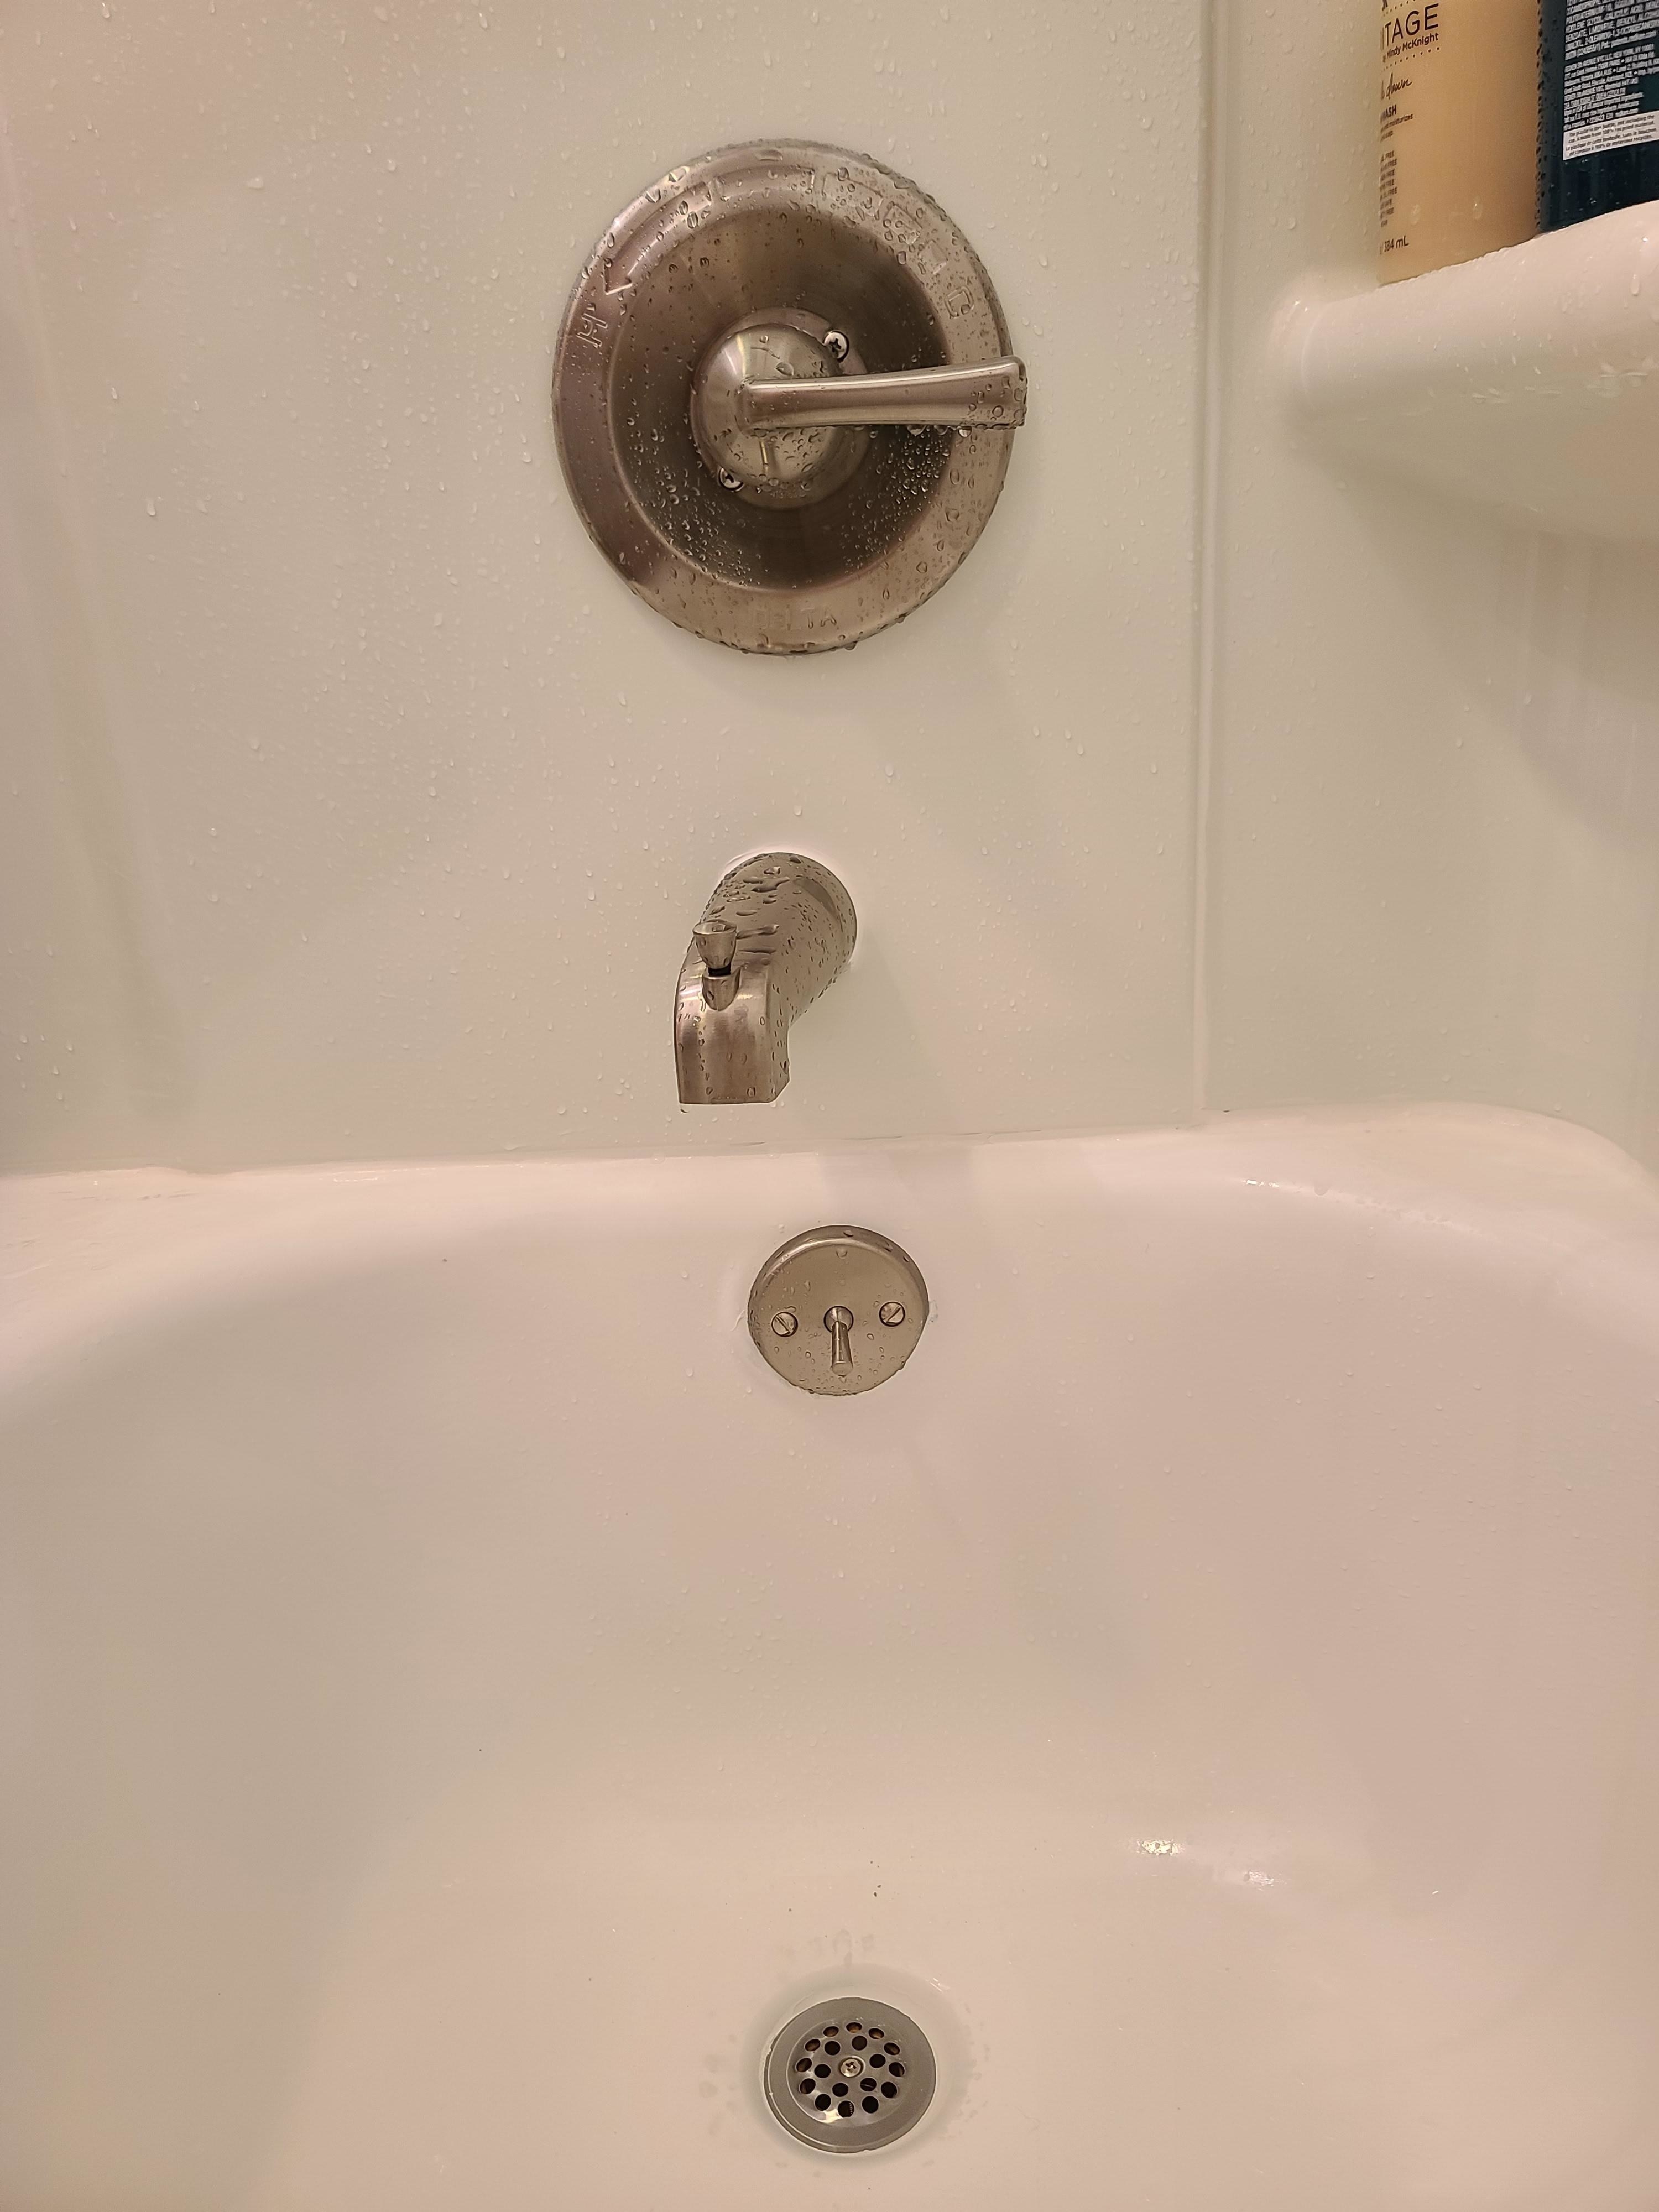 Misaligned faucet and handles in a bathtub